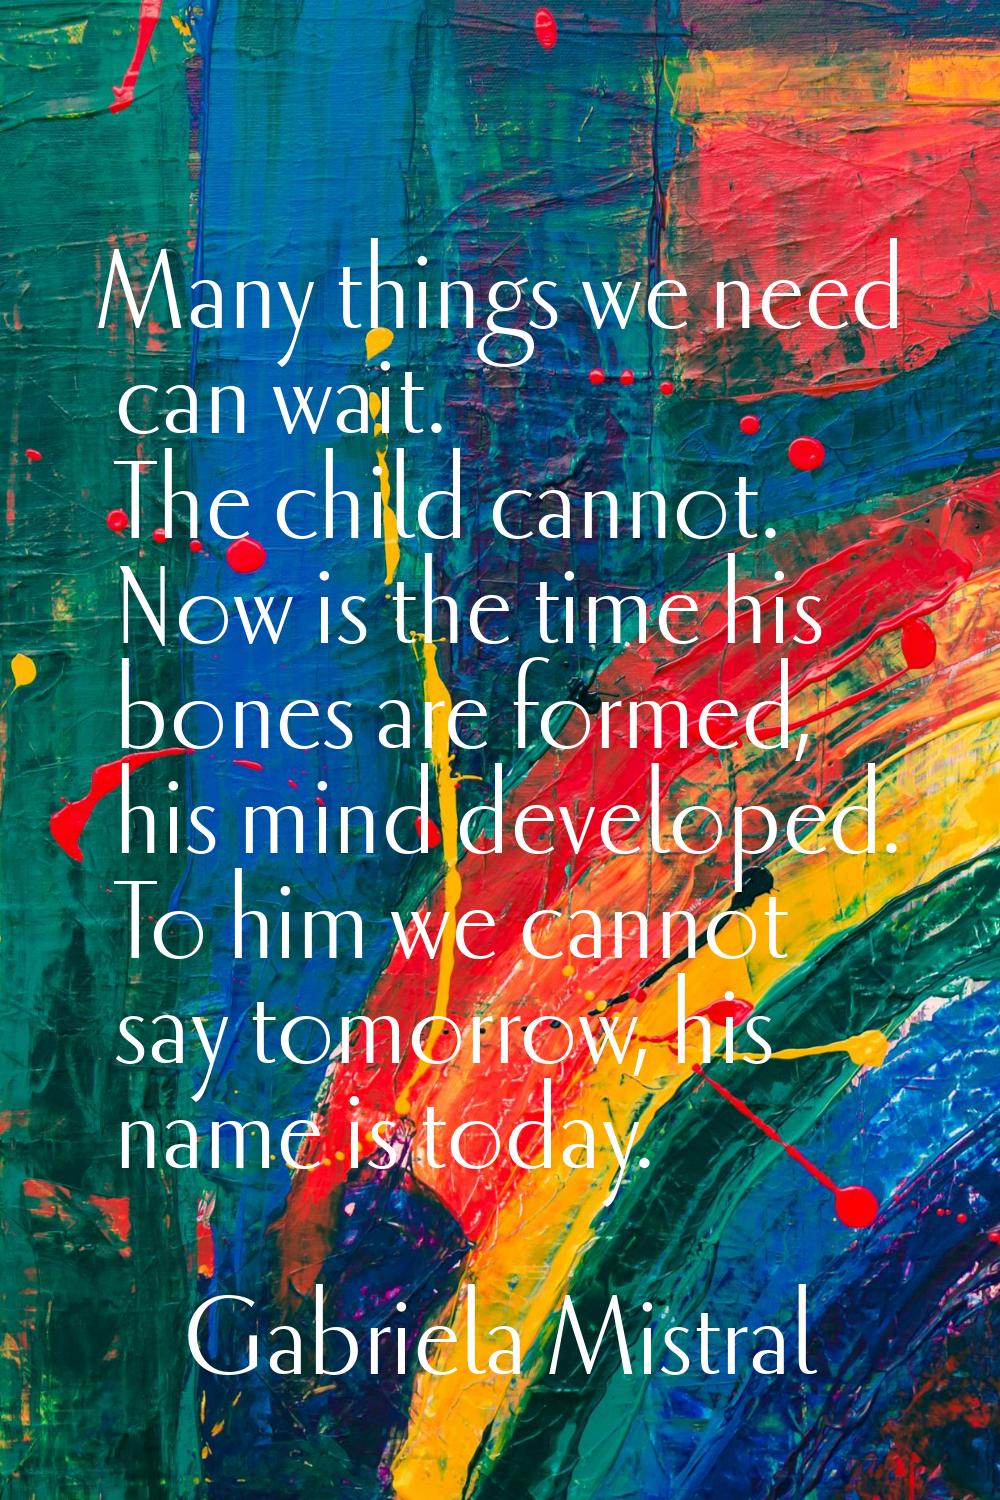 Many things we need can wait. The child cannot. Now is the time his bones are formed, his mind deve